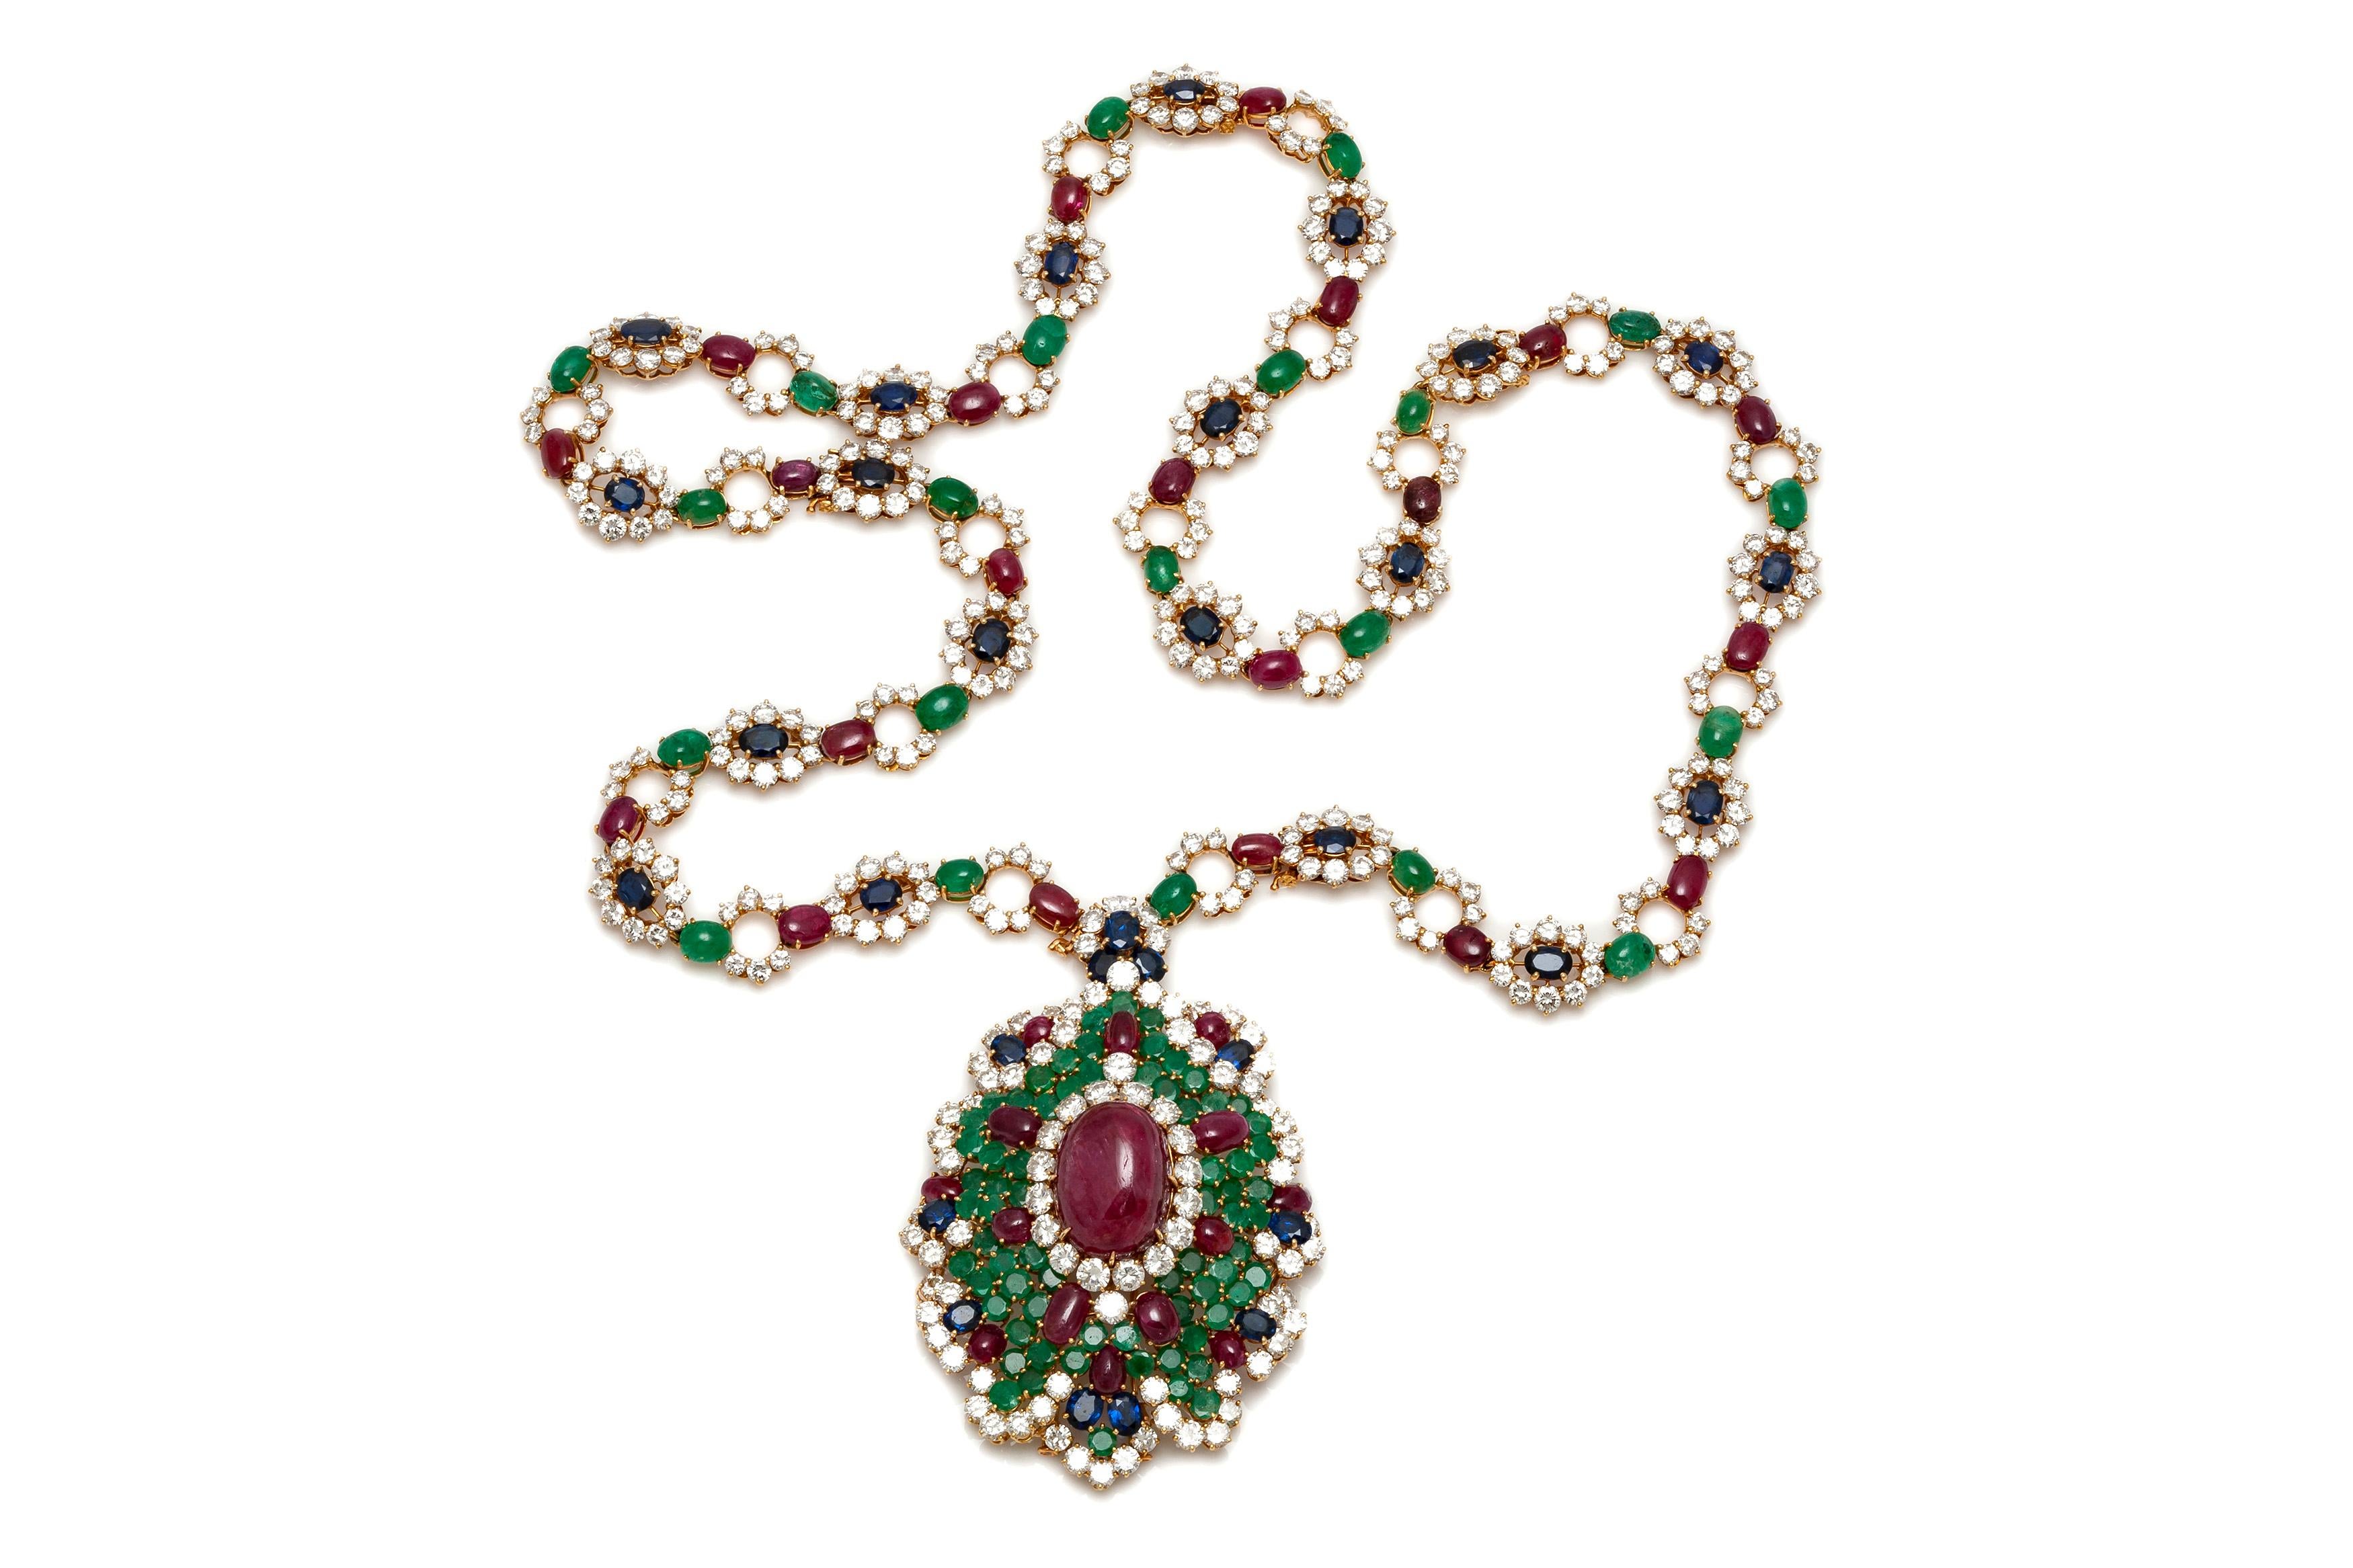 Finley crafted in 18k yellow gold with a center Cabochon Ruby weighing approximately 28.00 carats, additional 35 Cabochon Rubies weighing approximately a total of 31.50 carats, 21 Cabochon and 68 Round cut Emeralds weighing approximately a total of